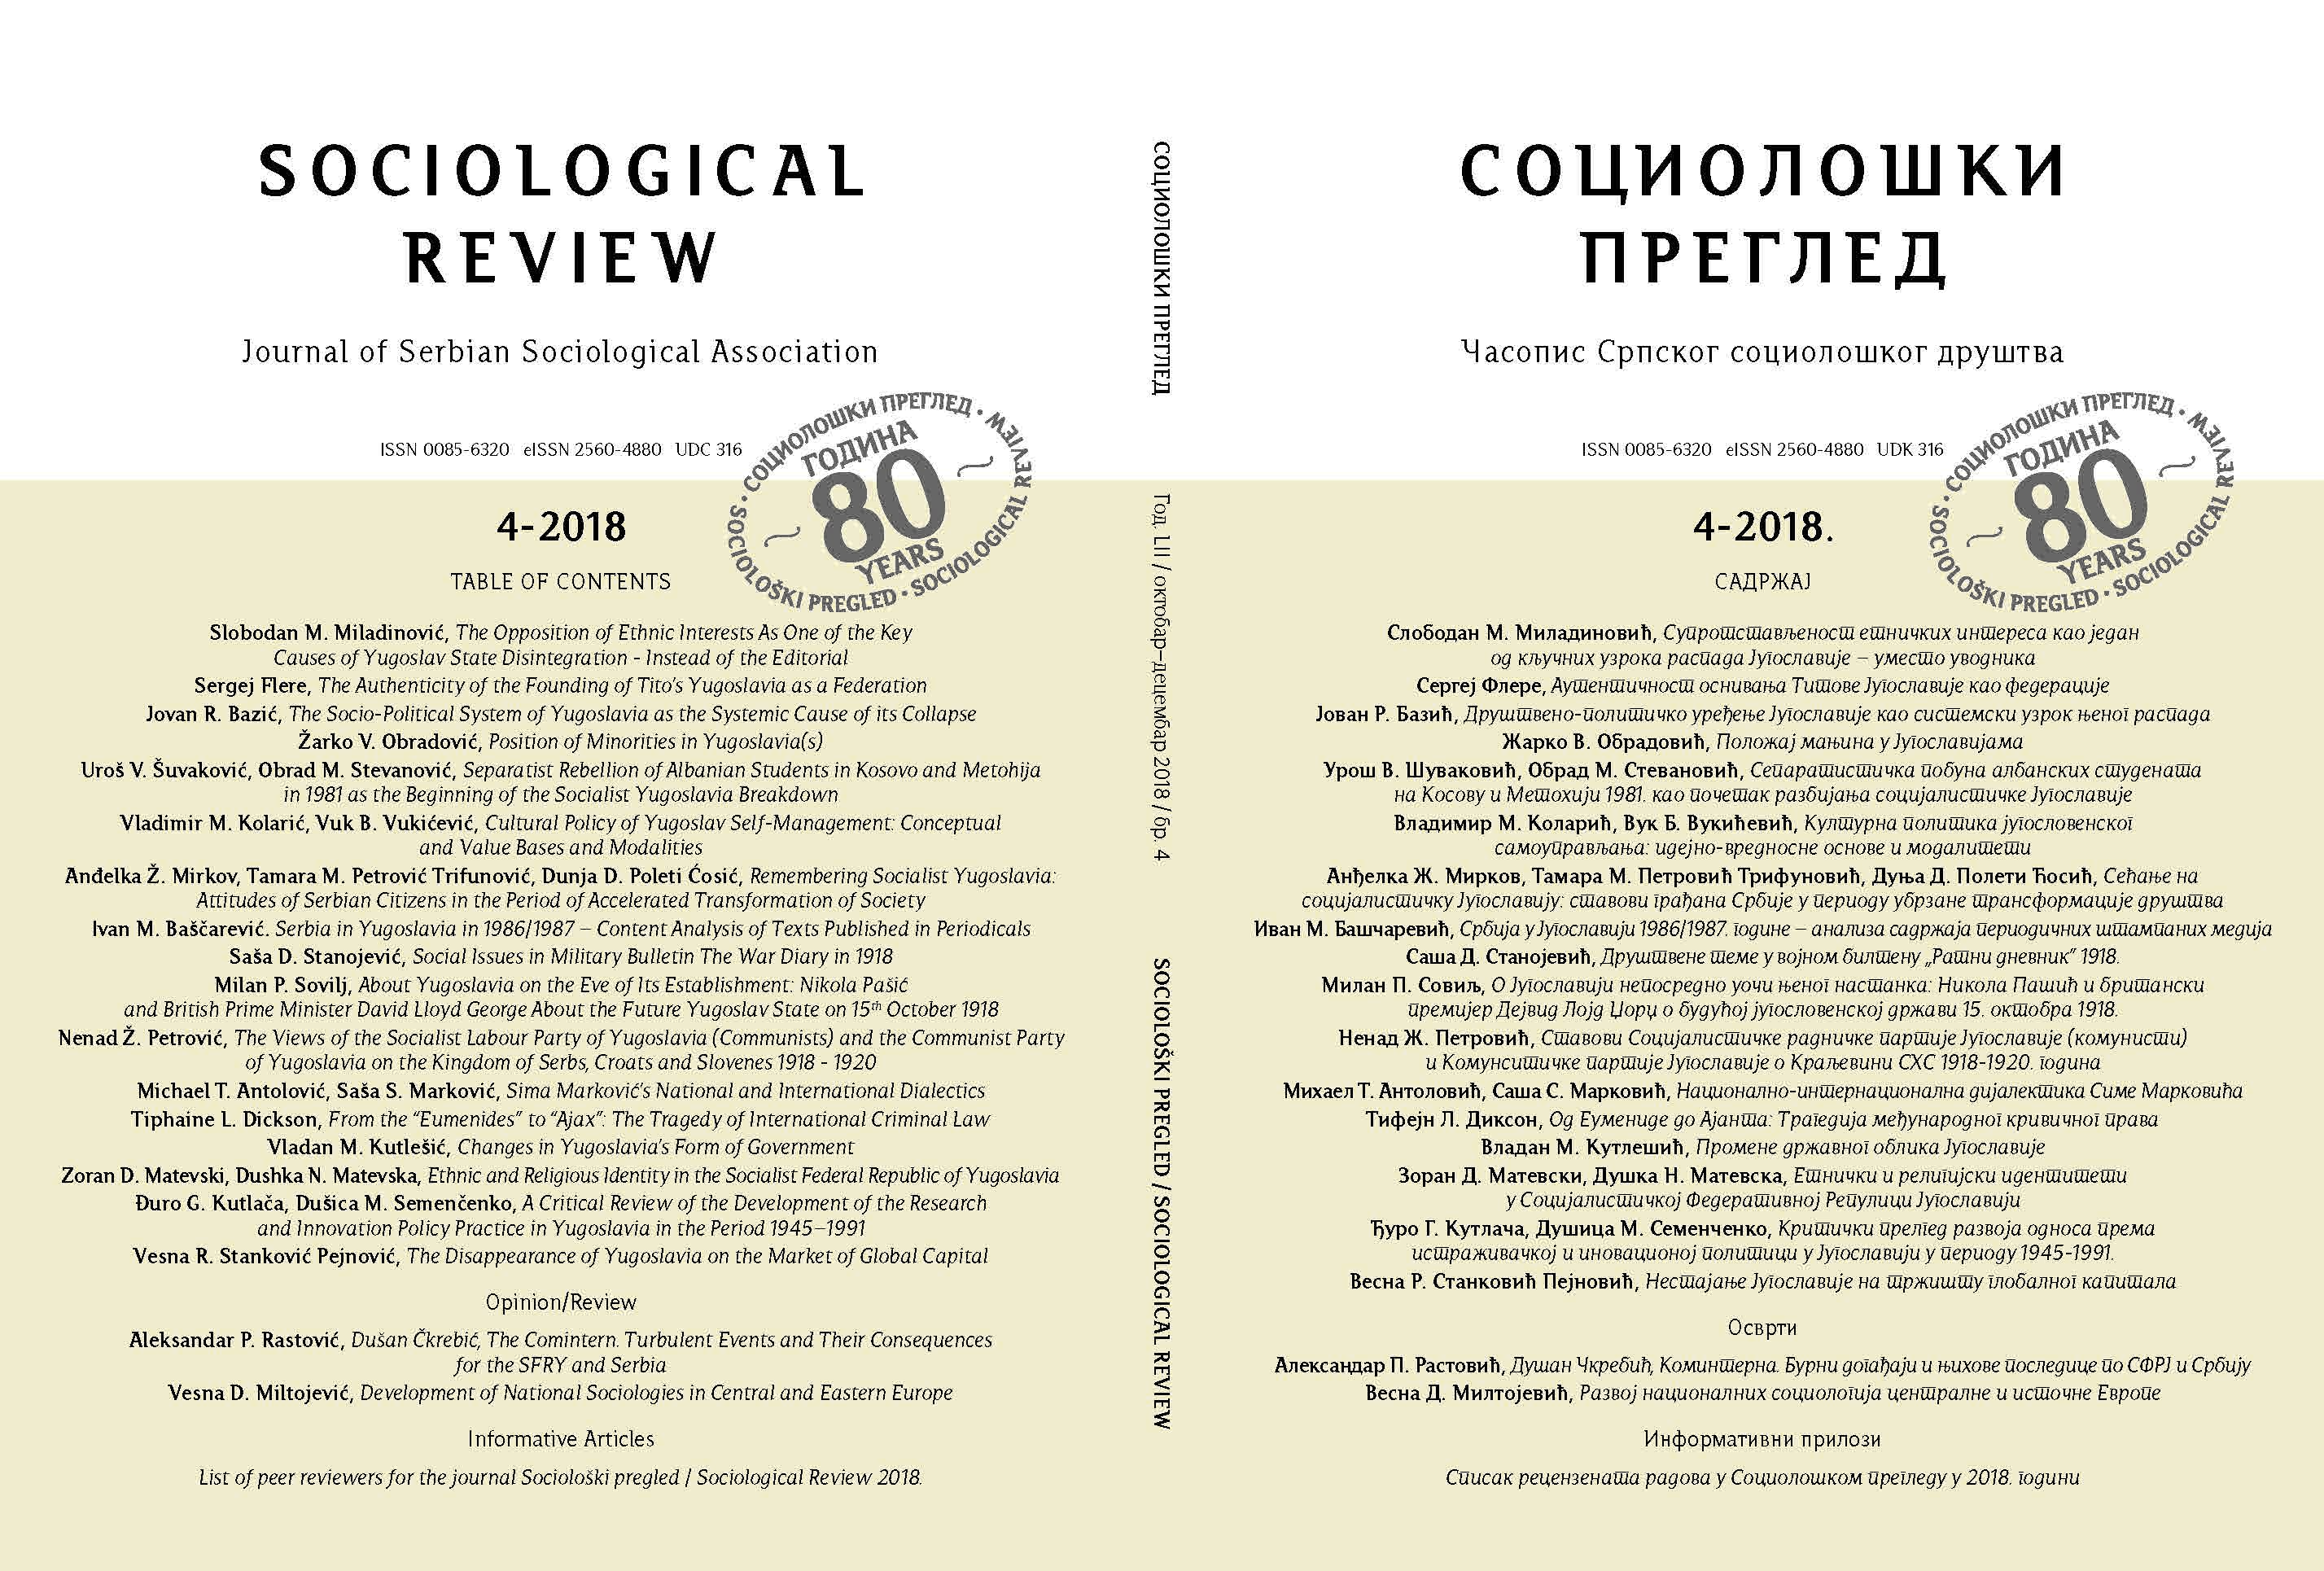 A Critical Review of the Development of the Research and Innovation Policy Practice in Yugoslavia in the Period 1945–1991 Cover Image